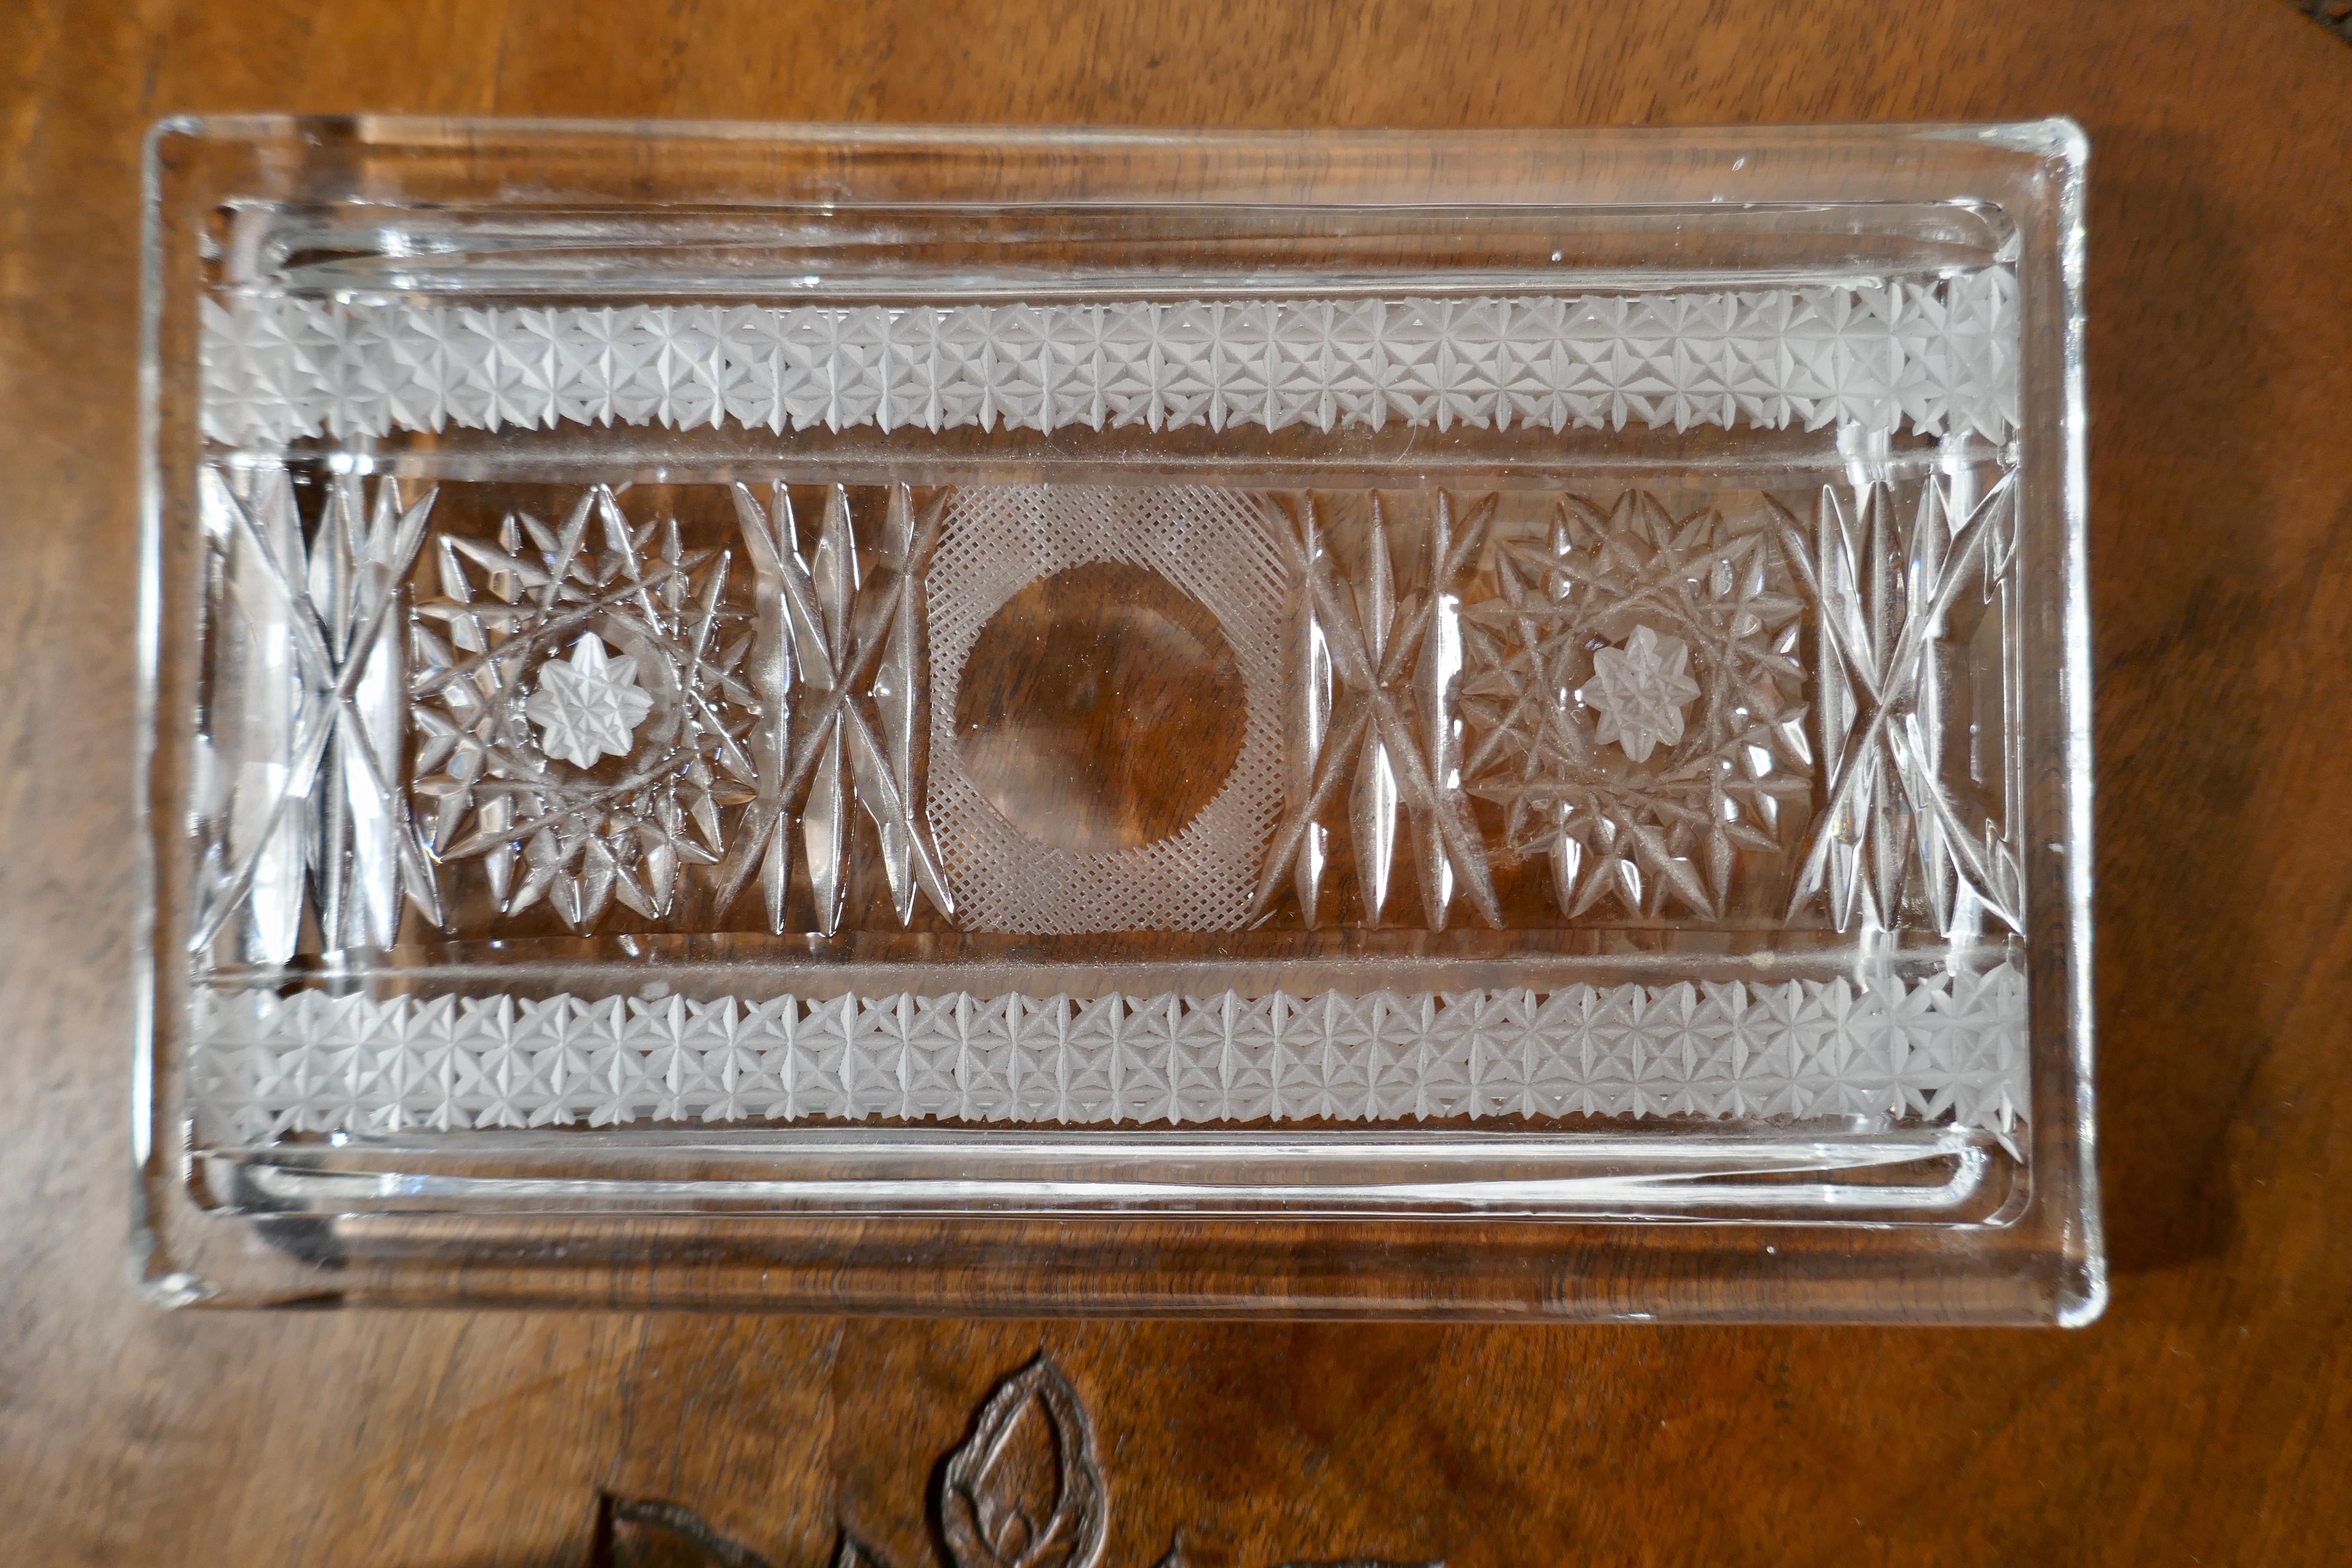 Beautiful rectangular star cut crystal dish or box with cover

A charming piece, possible table wear like a butter dish or a cigarette box
The Box is in high quality crystal in excellent condition and heavy
It is 3” high, and 7.5”x 4.4”
PG67.